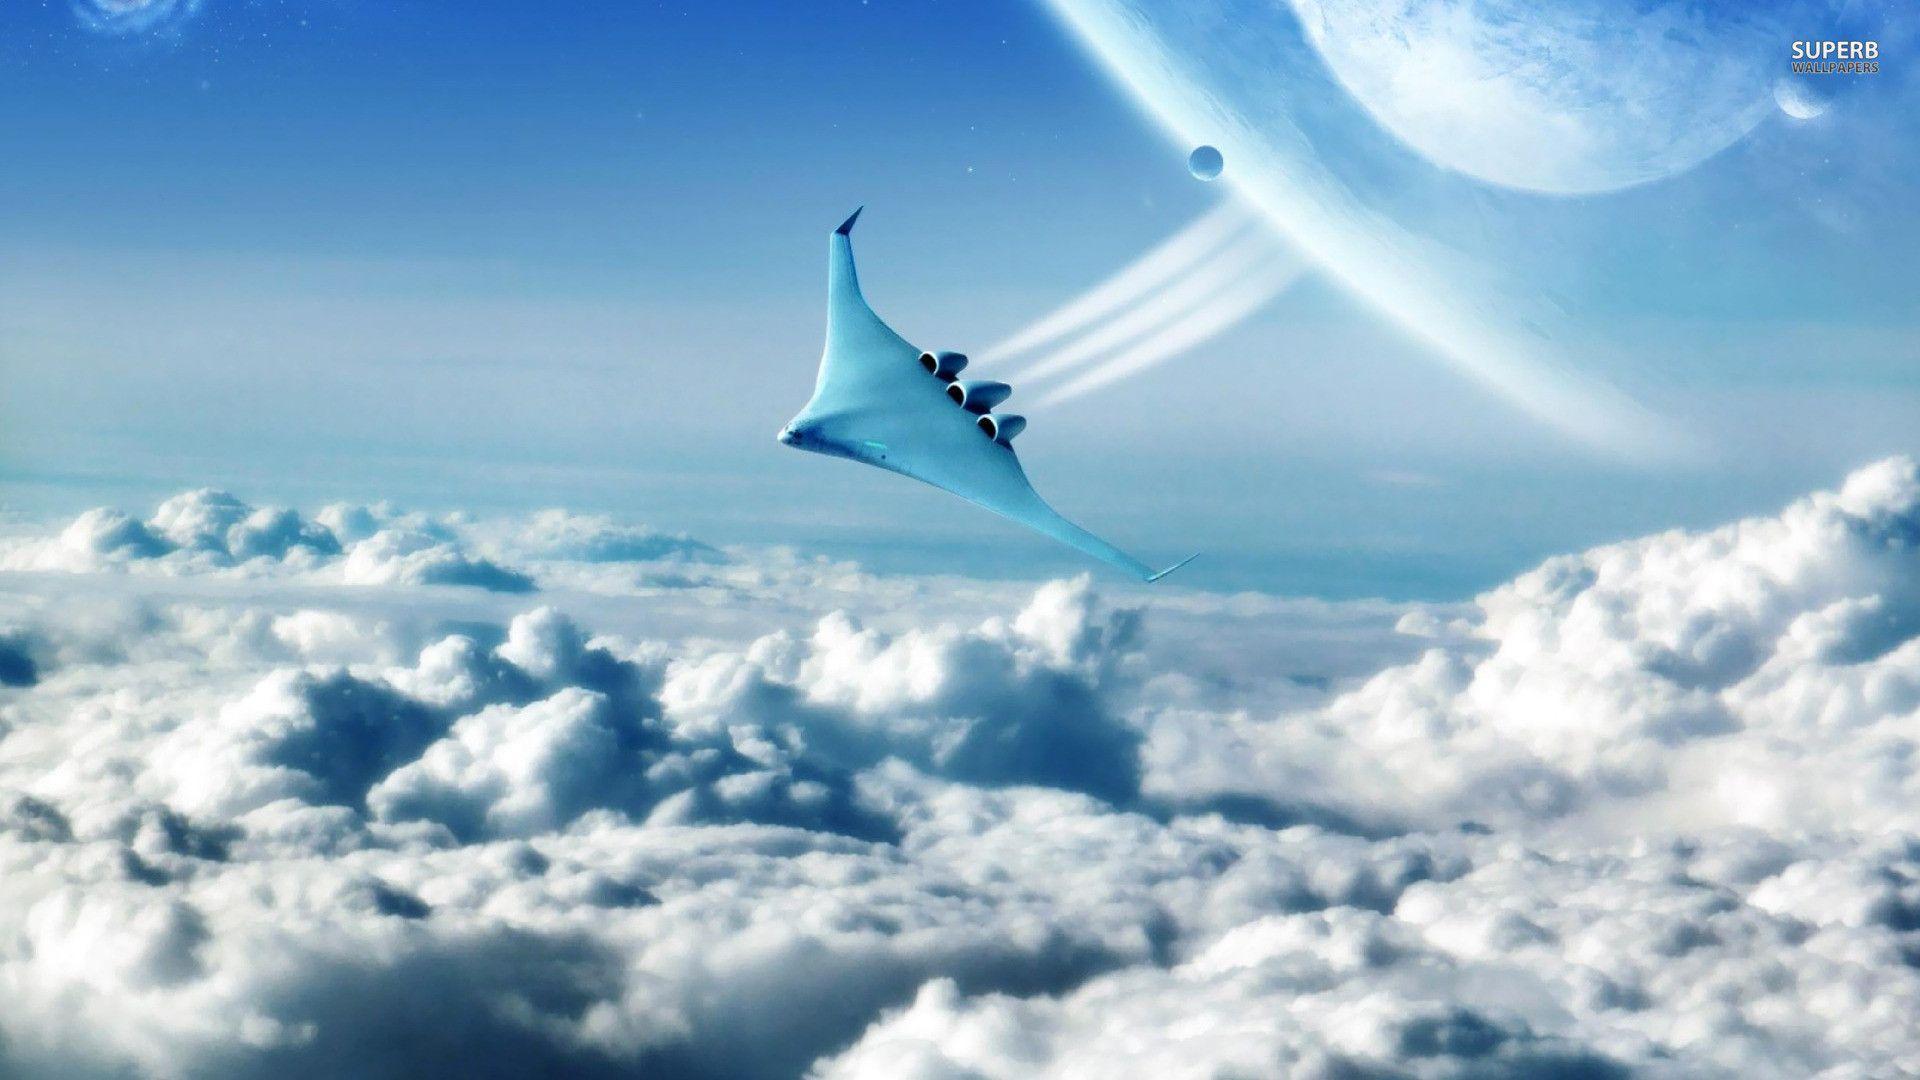 Spaceship above the clouds wallpaper wallpaper - #